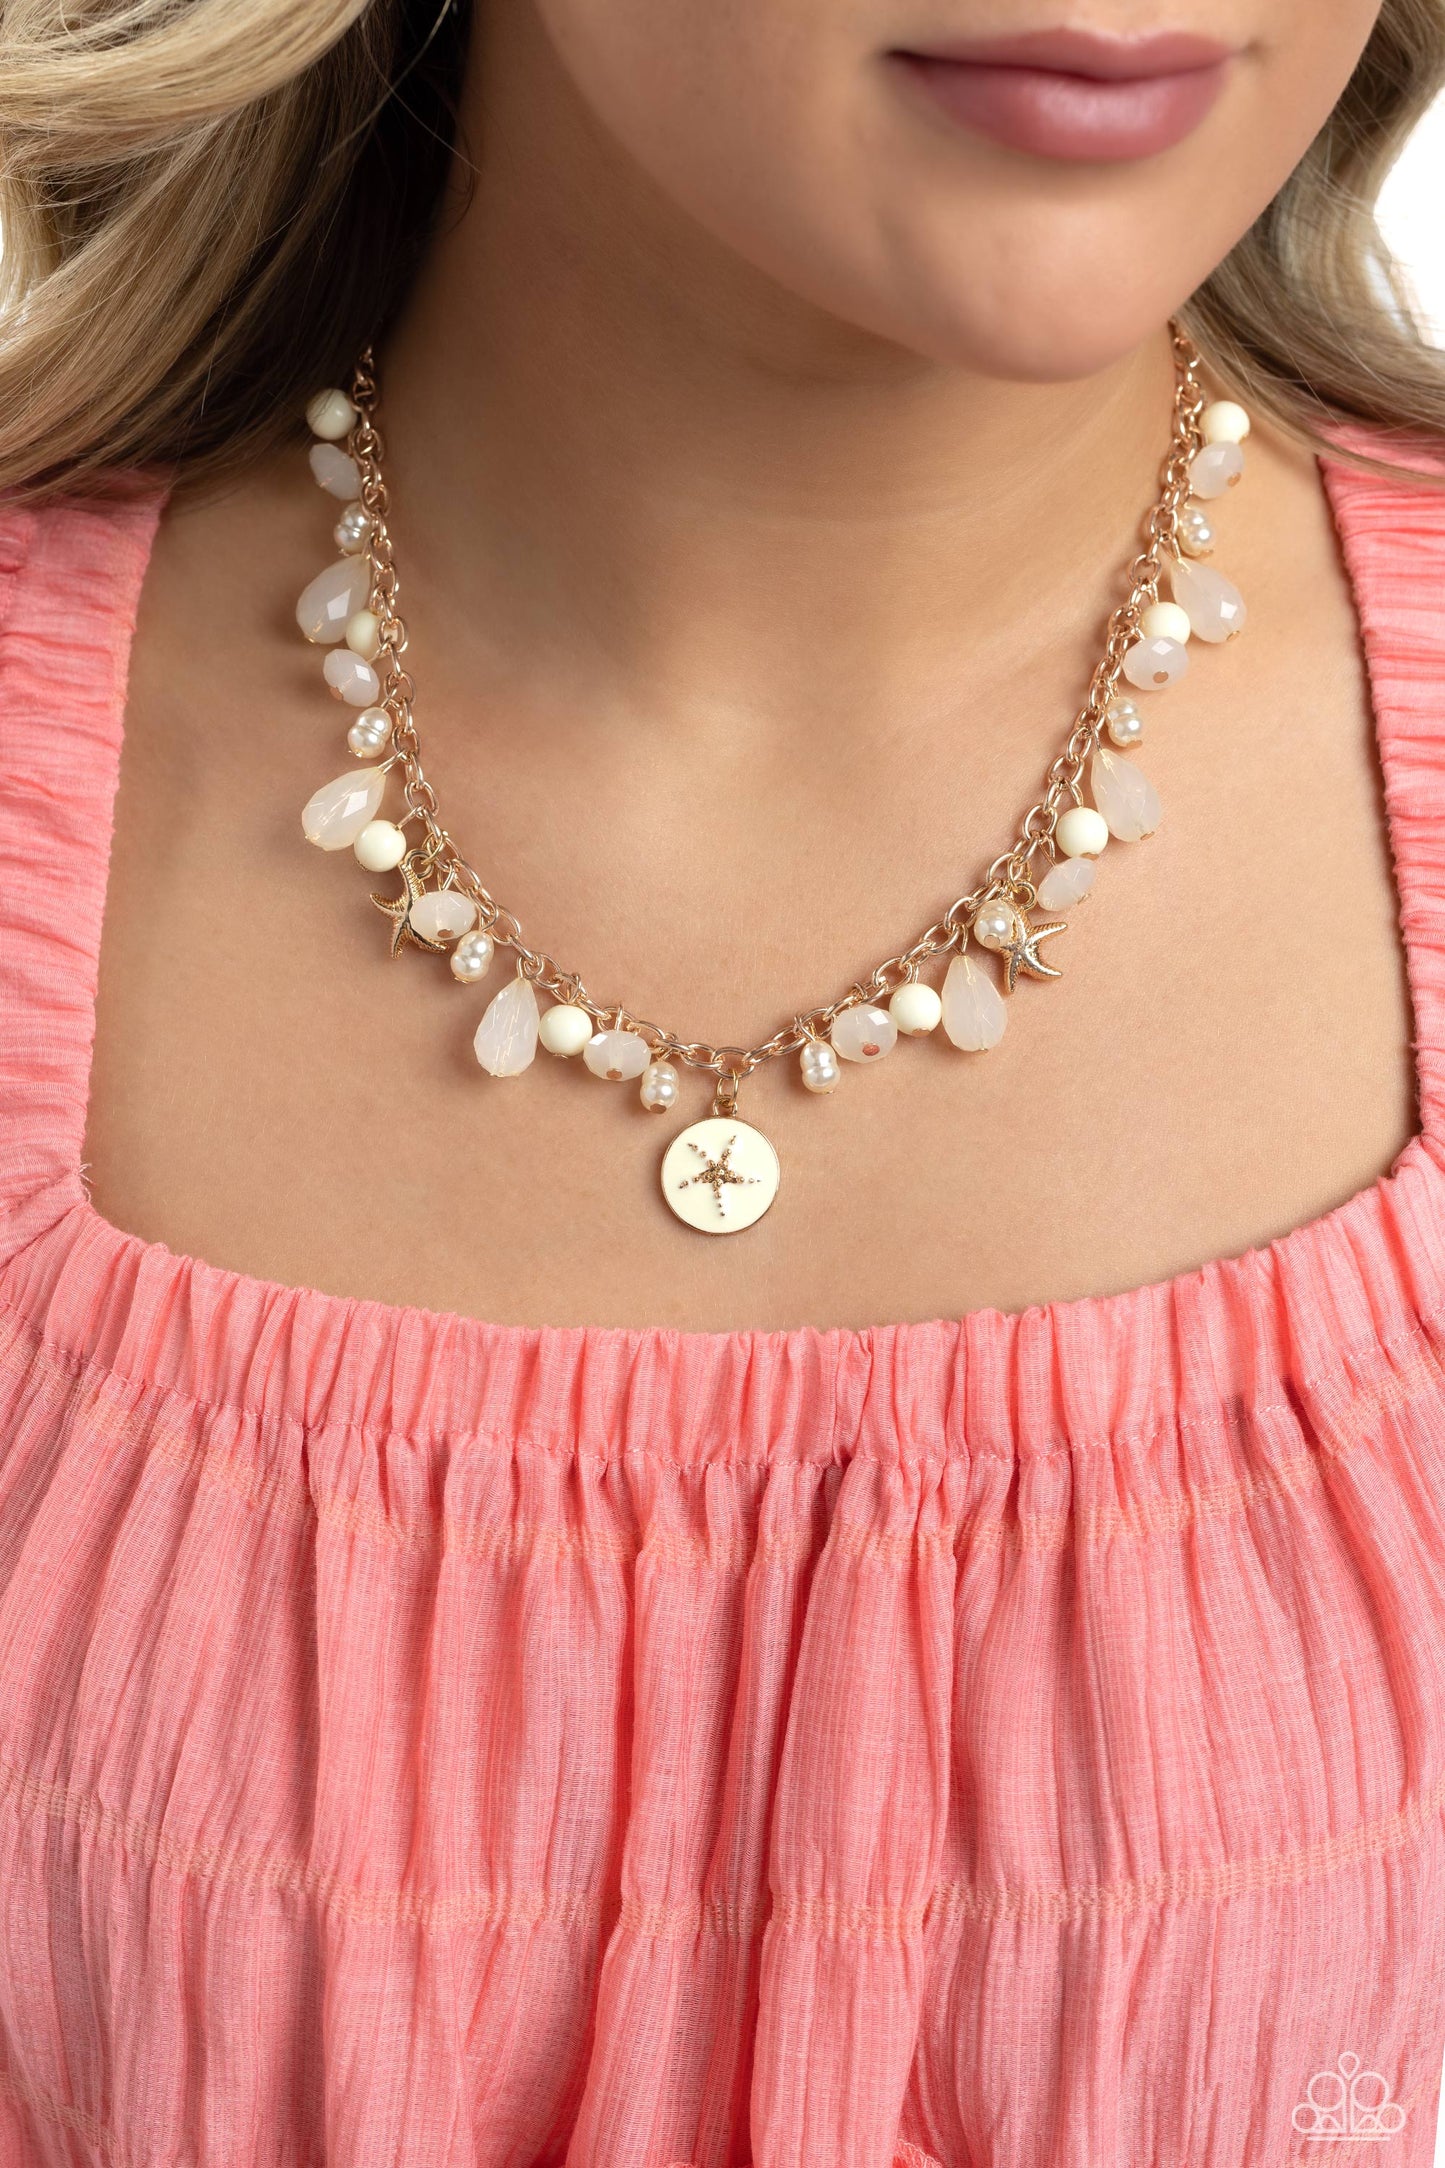 Surfer Serenade - Gold Starfish Charms/Ivory Beads/White Pearls Paparazzi Necklace & matching earrings